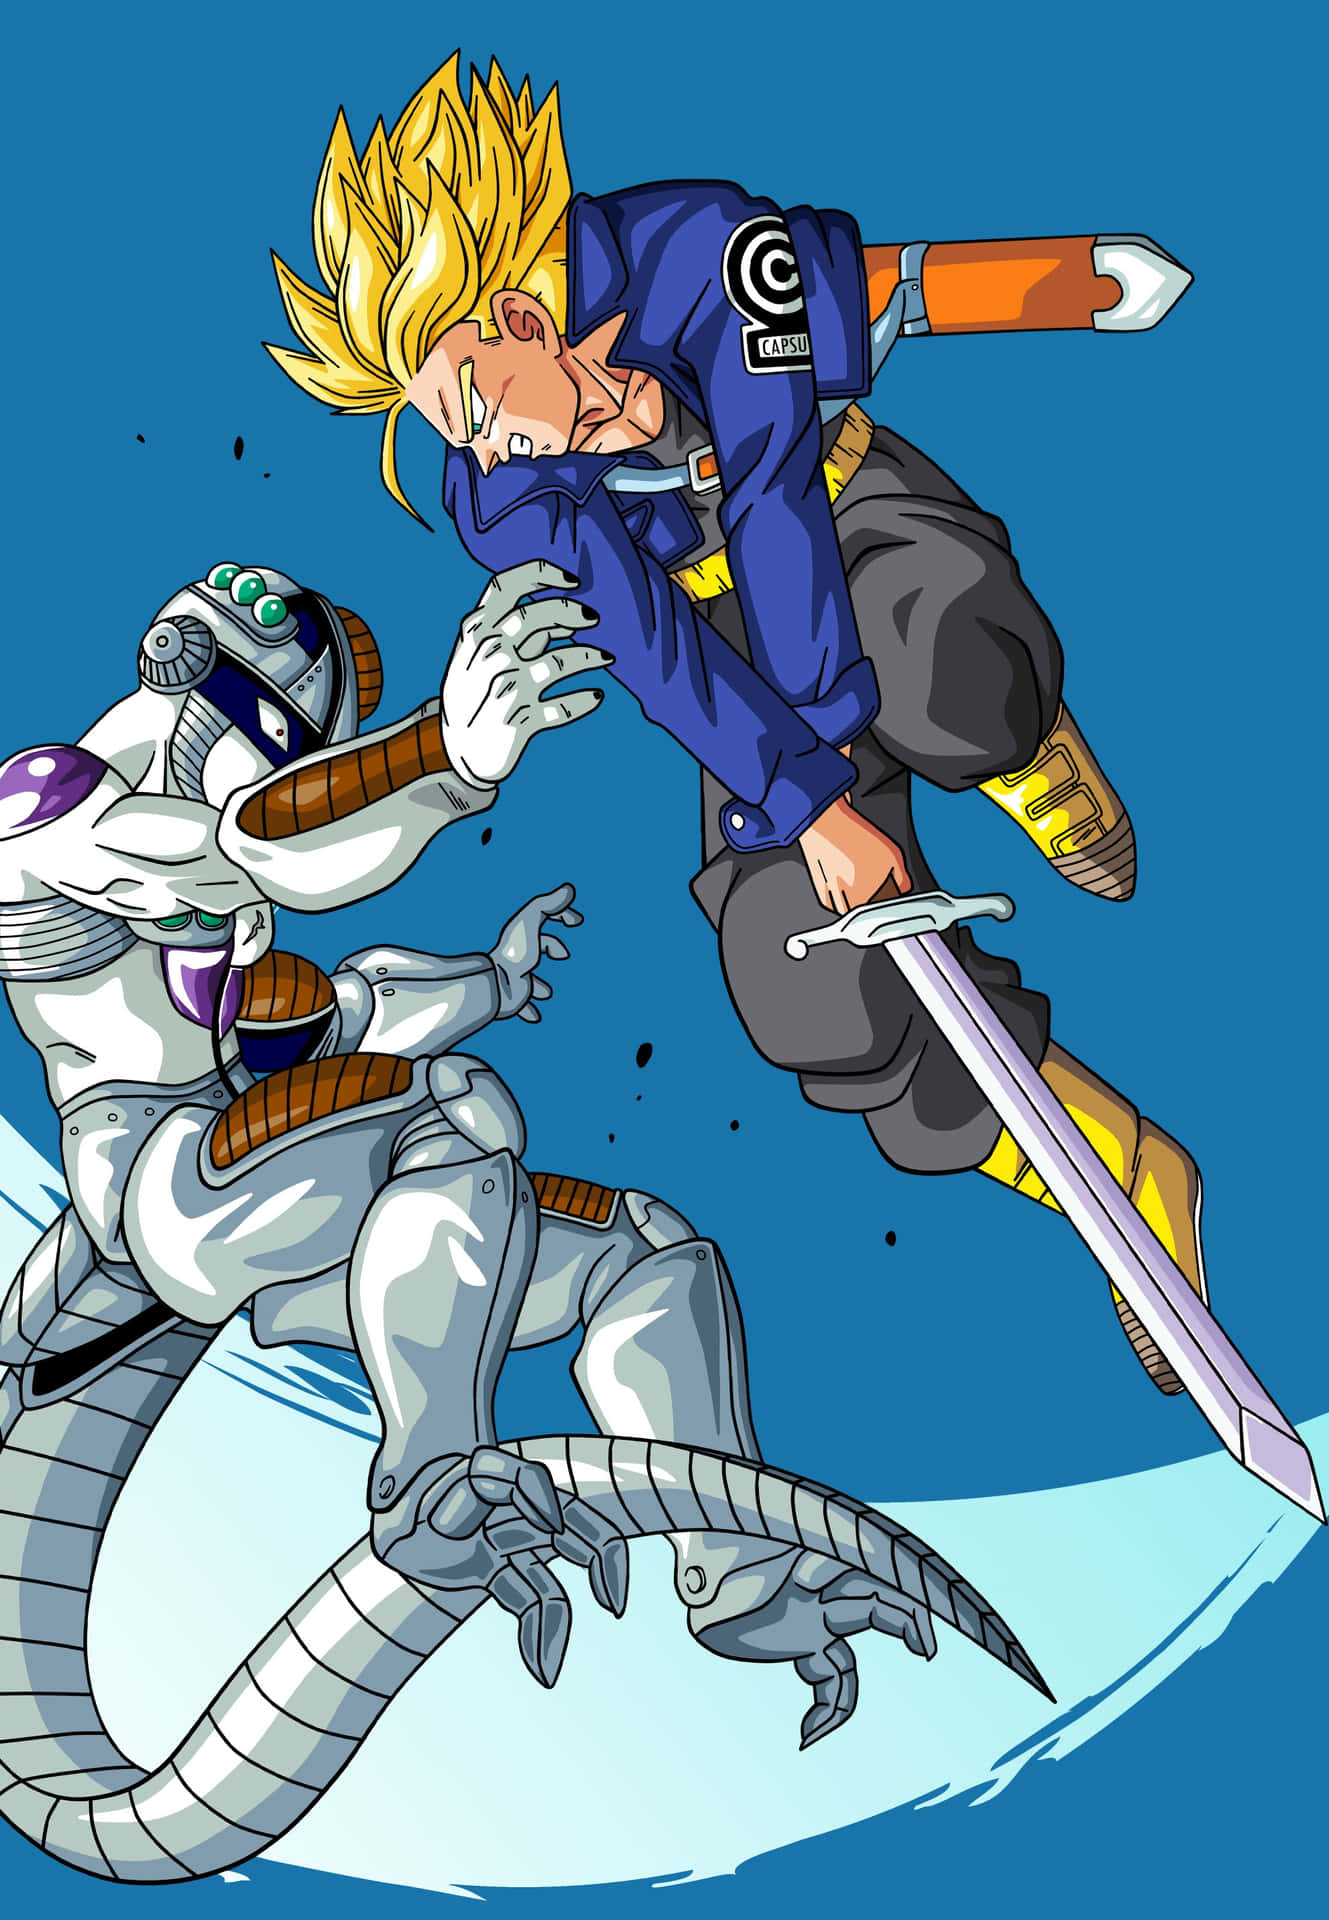 Upgrade your communication with a Trunks phone. Wallpaper